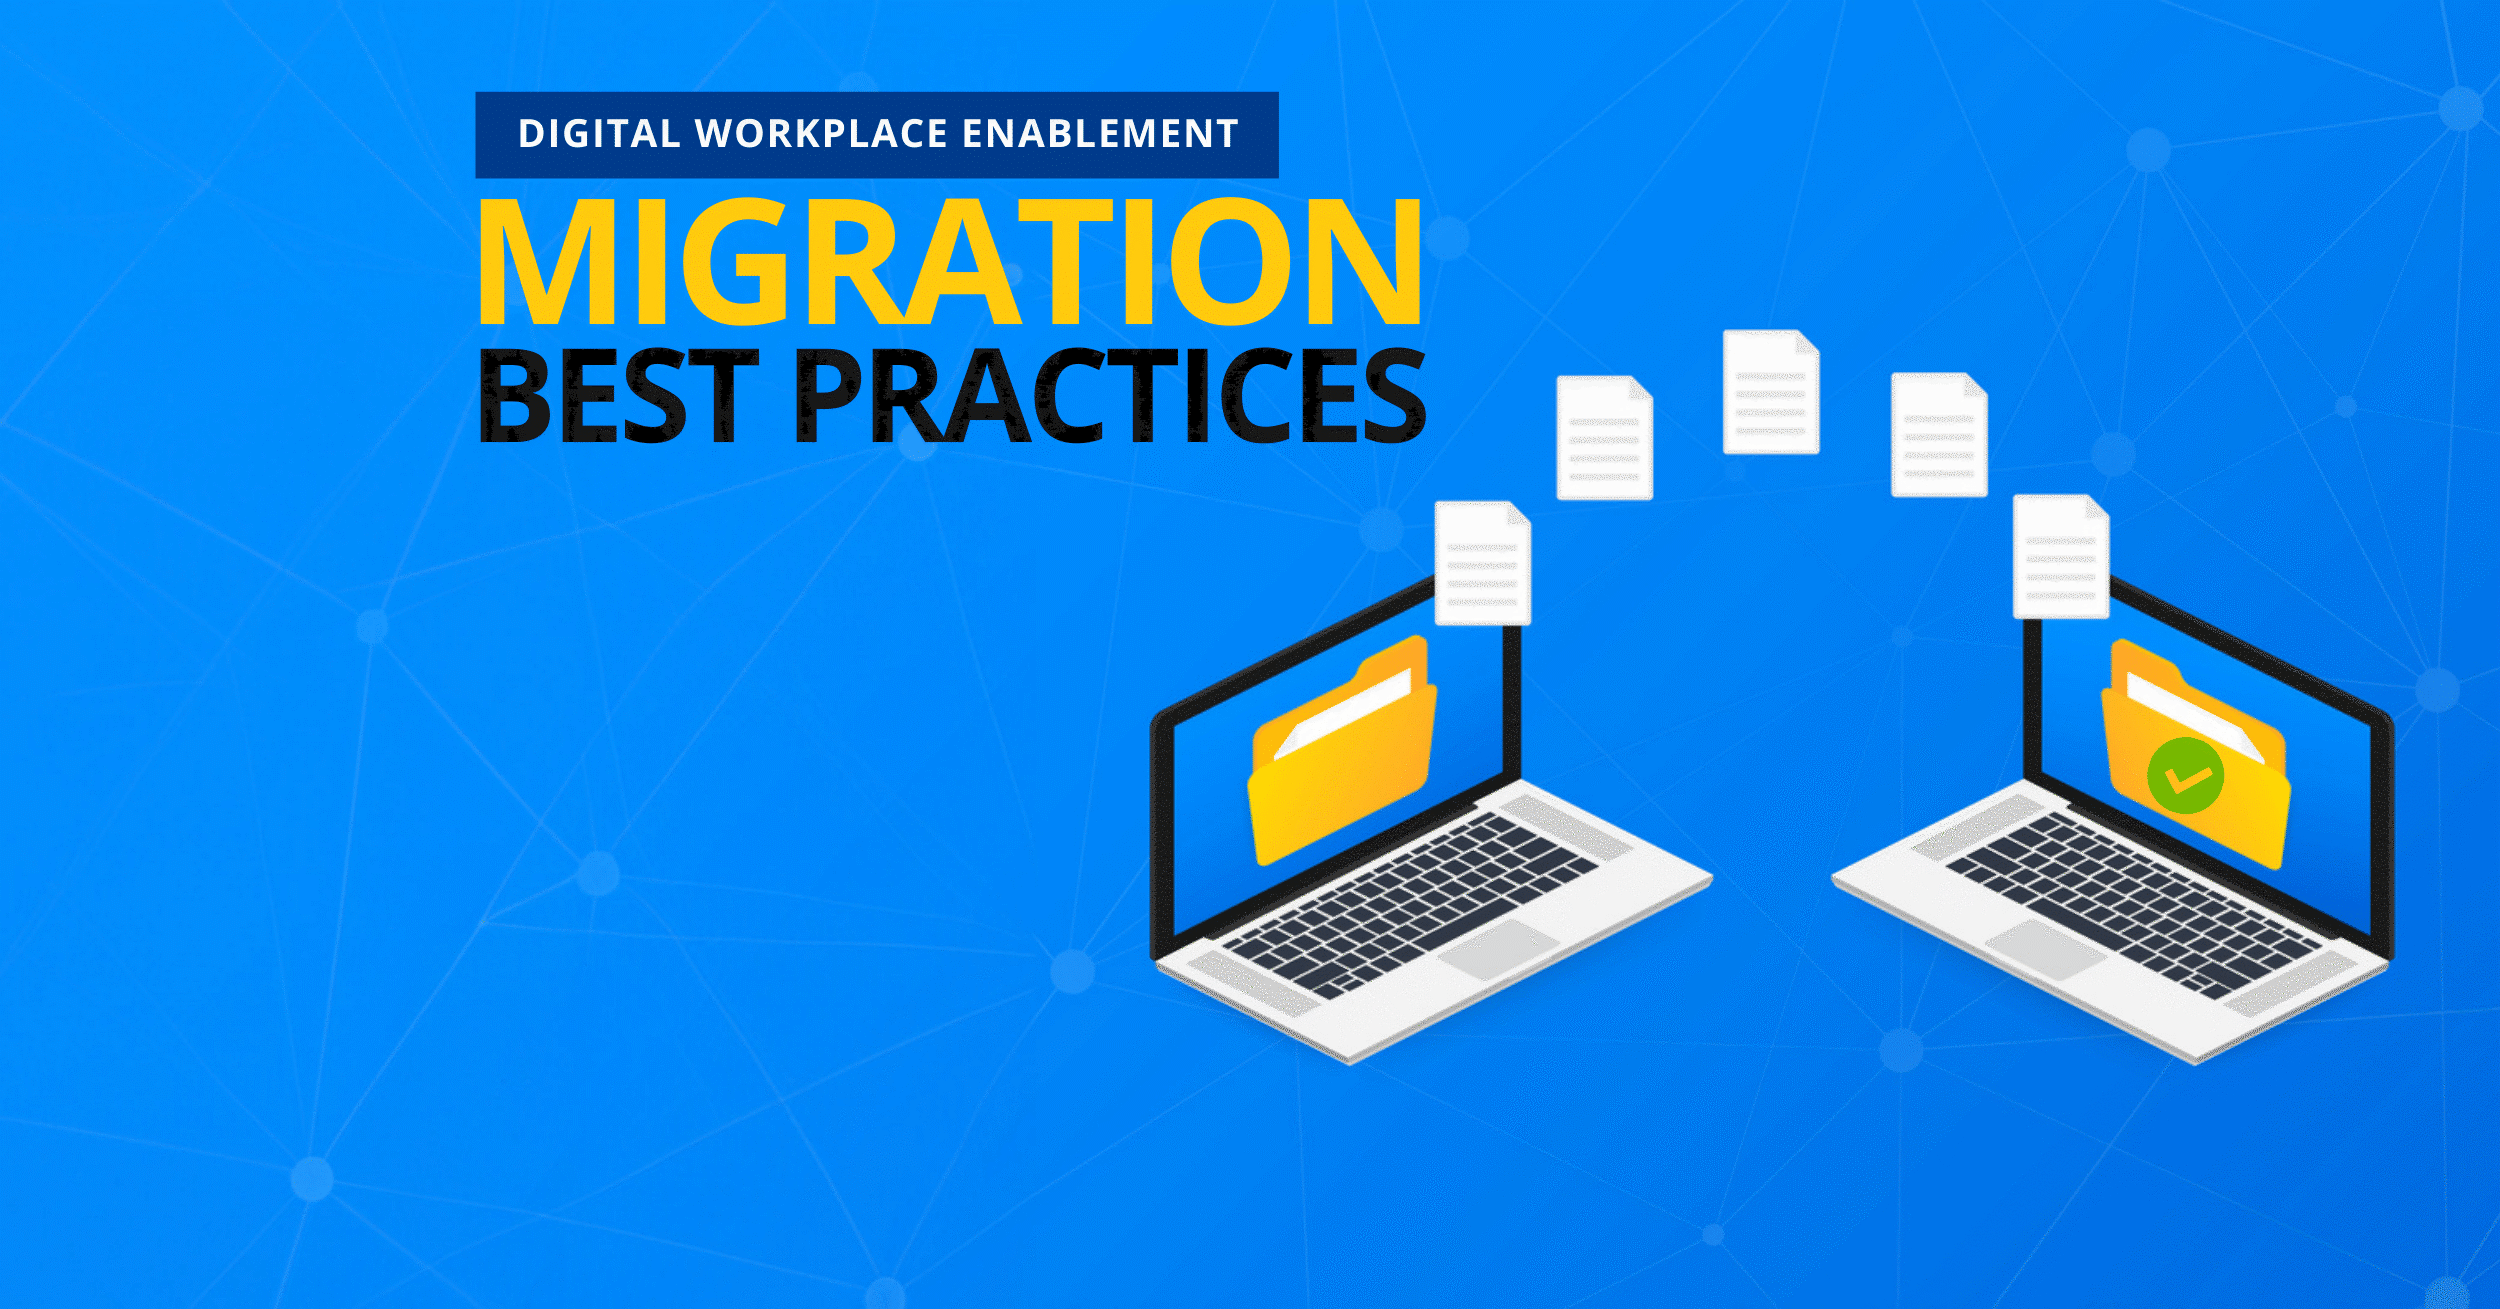 Maintaining Productivity During Data Migration: Best Practices to Avoid Downtime